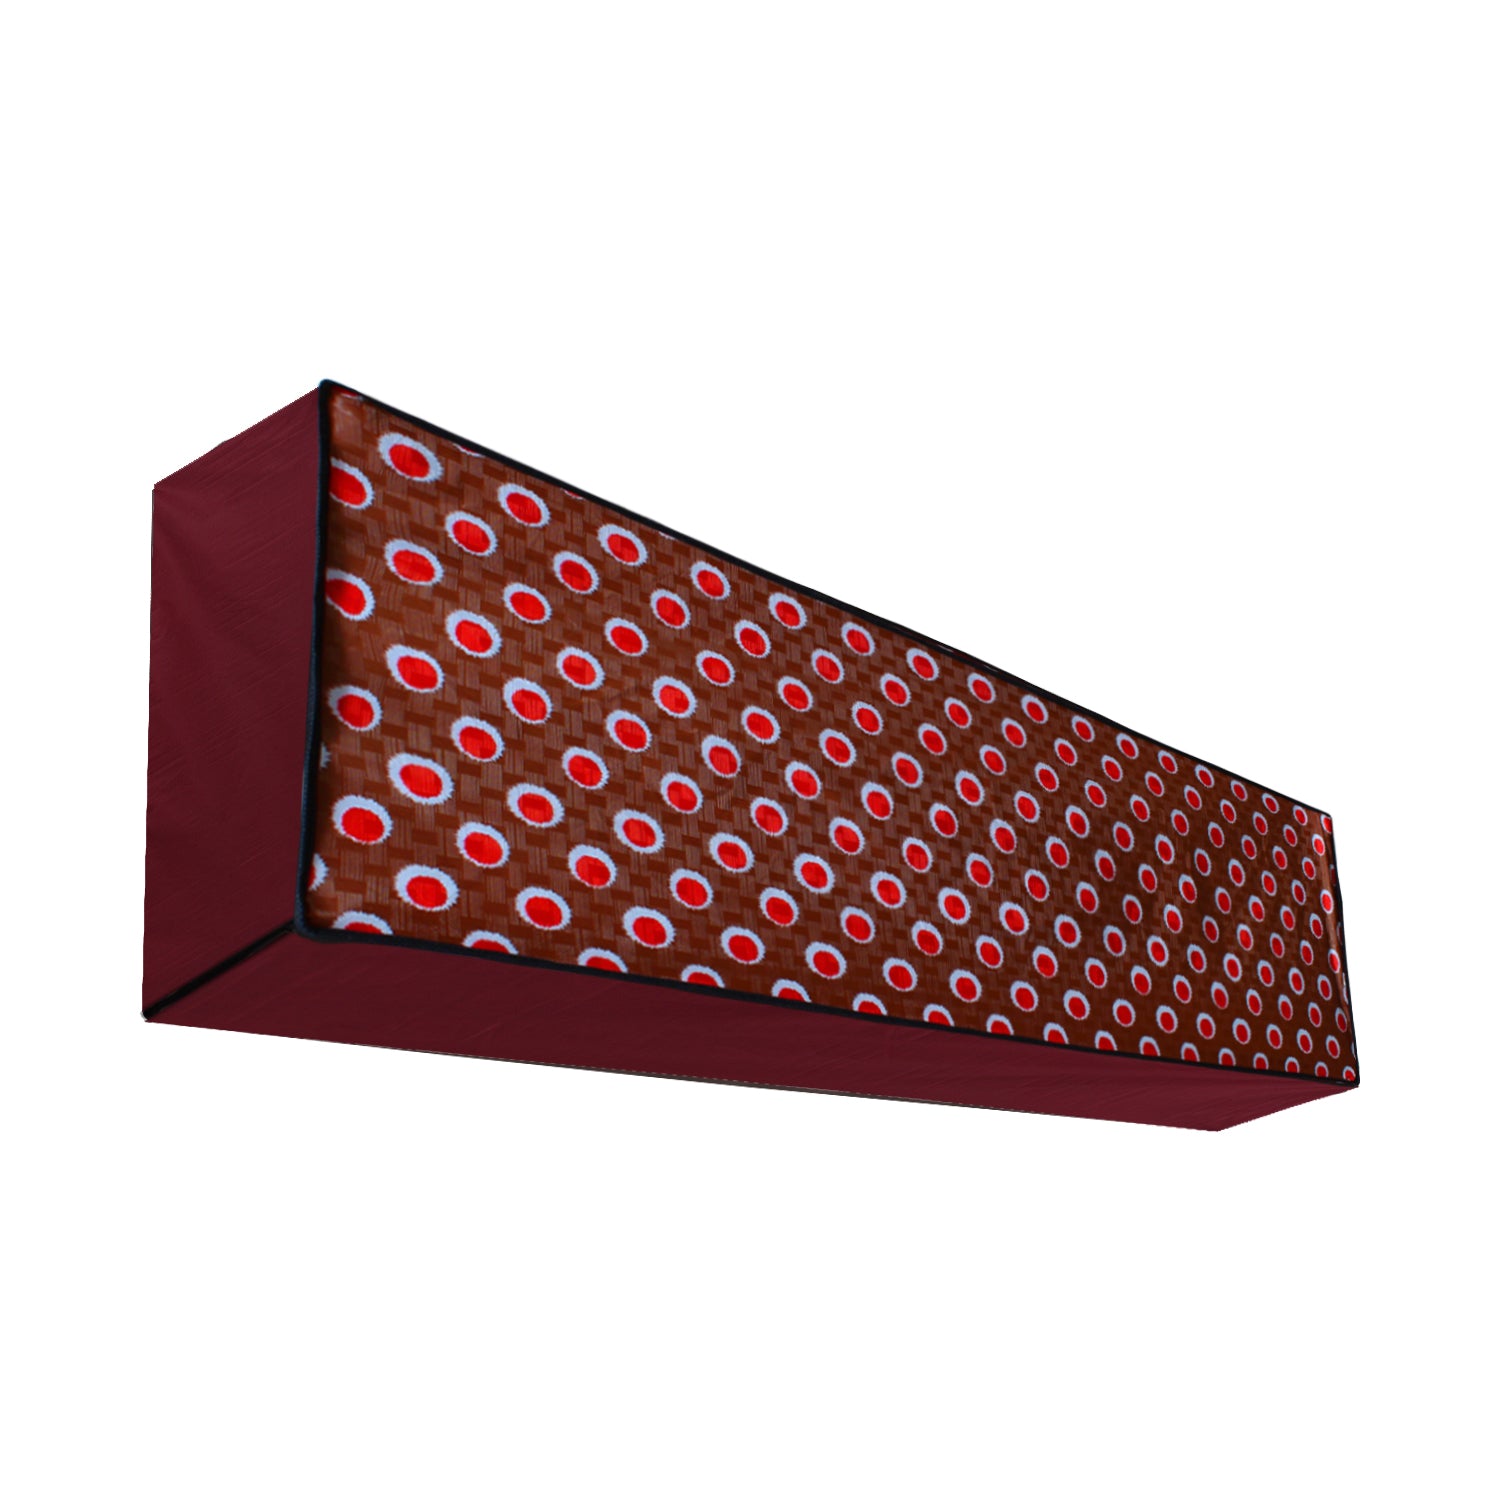 Waterproof and Dustproof Split Indoor AC Cover, SA45 - Dream Care Furnishings Private Limited